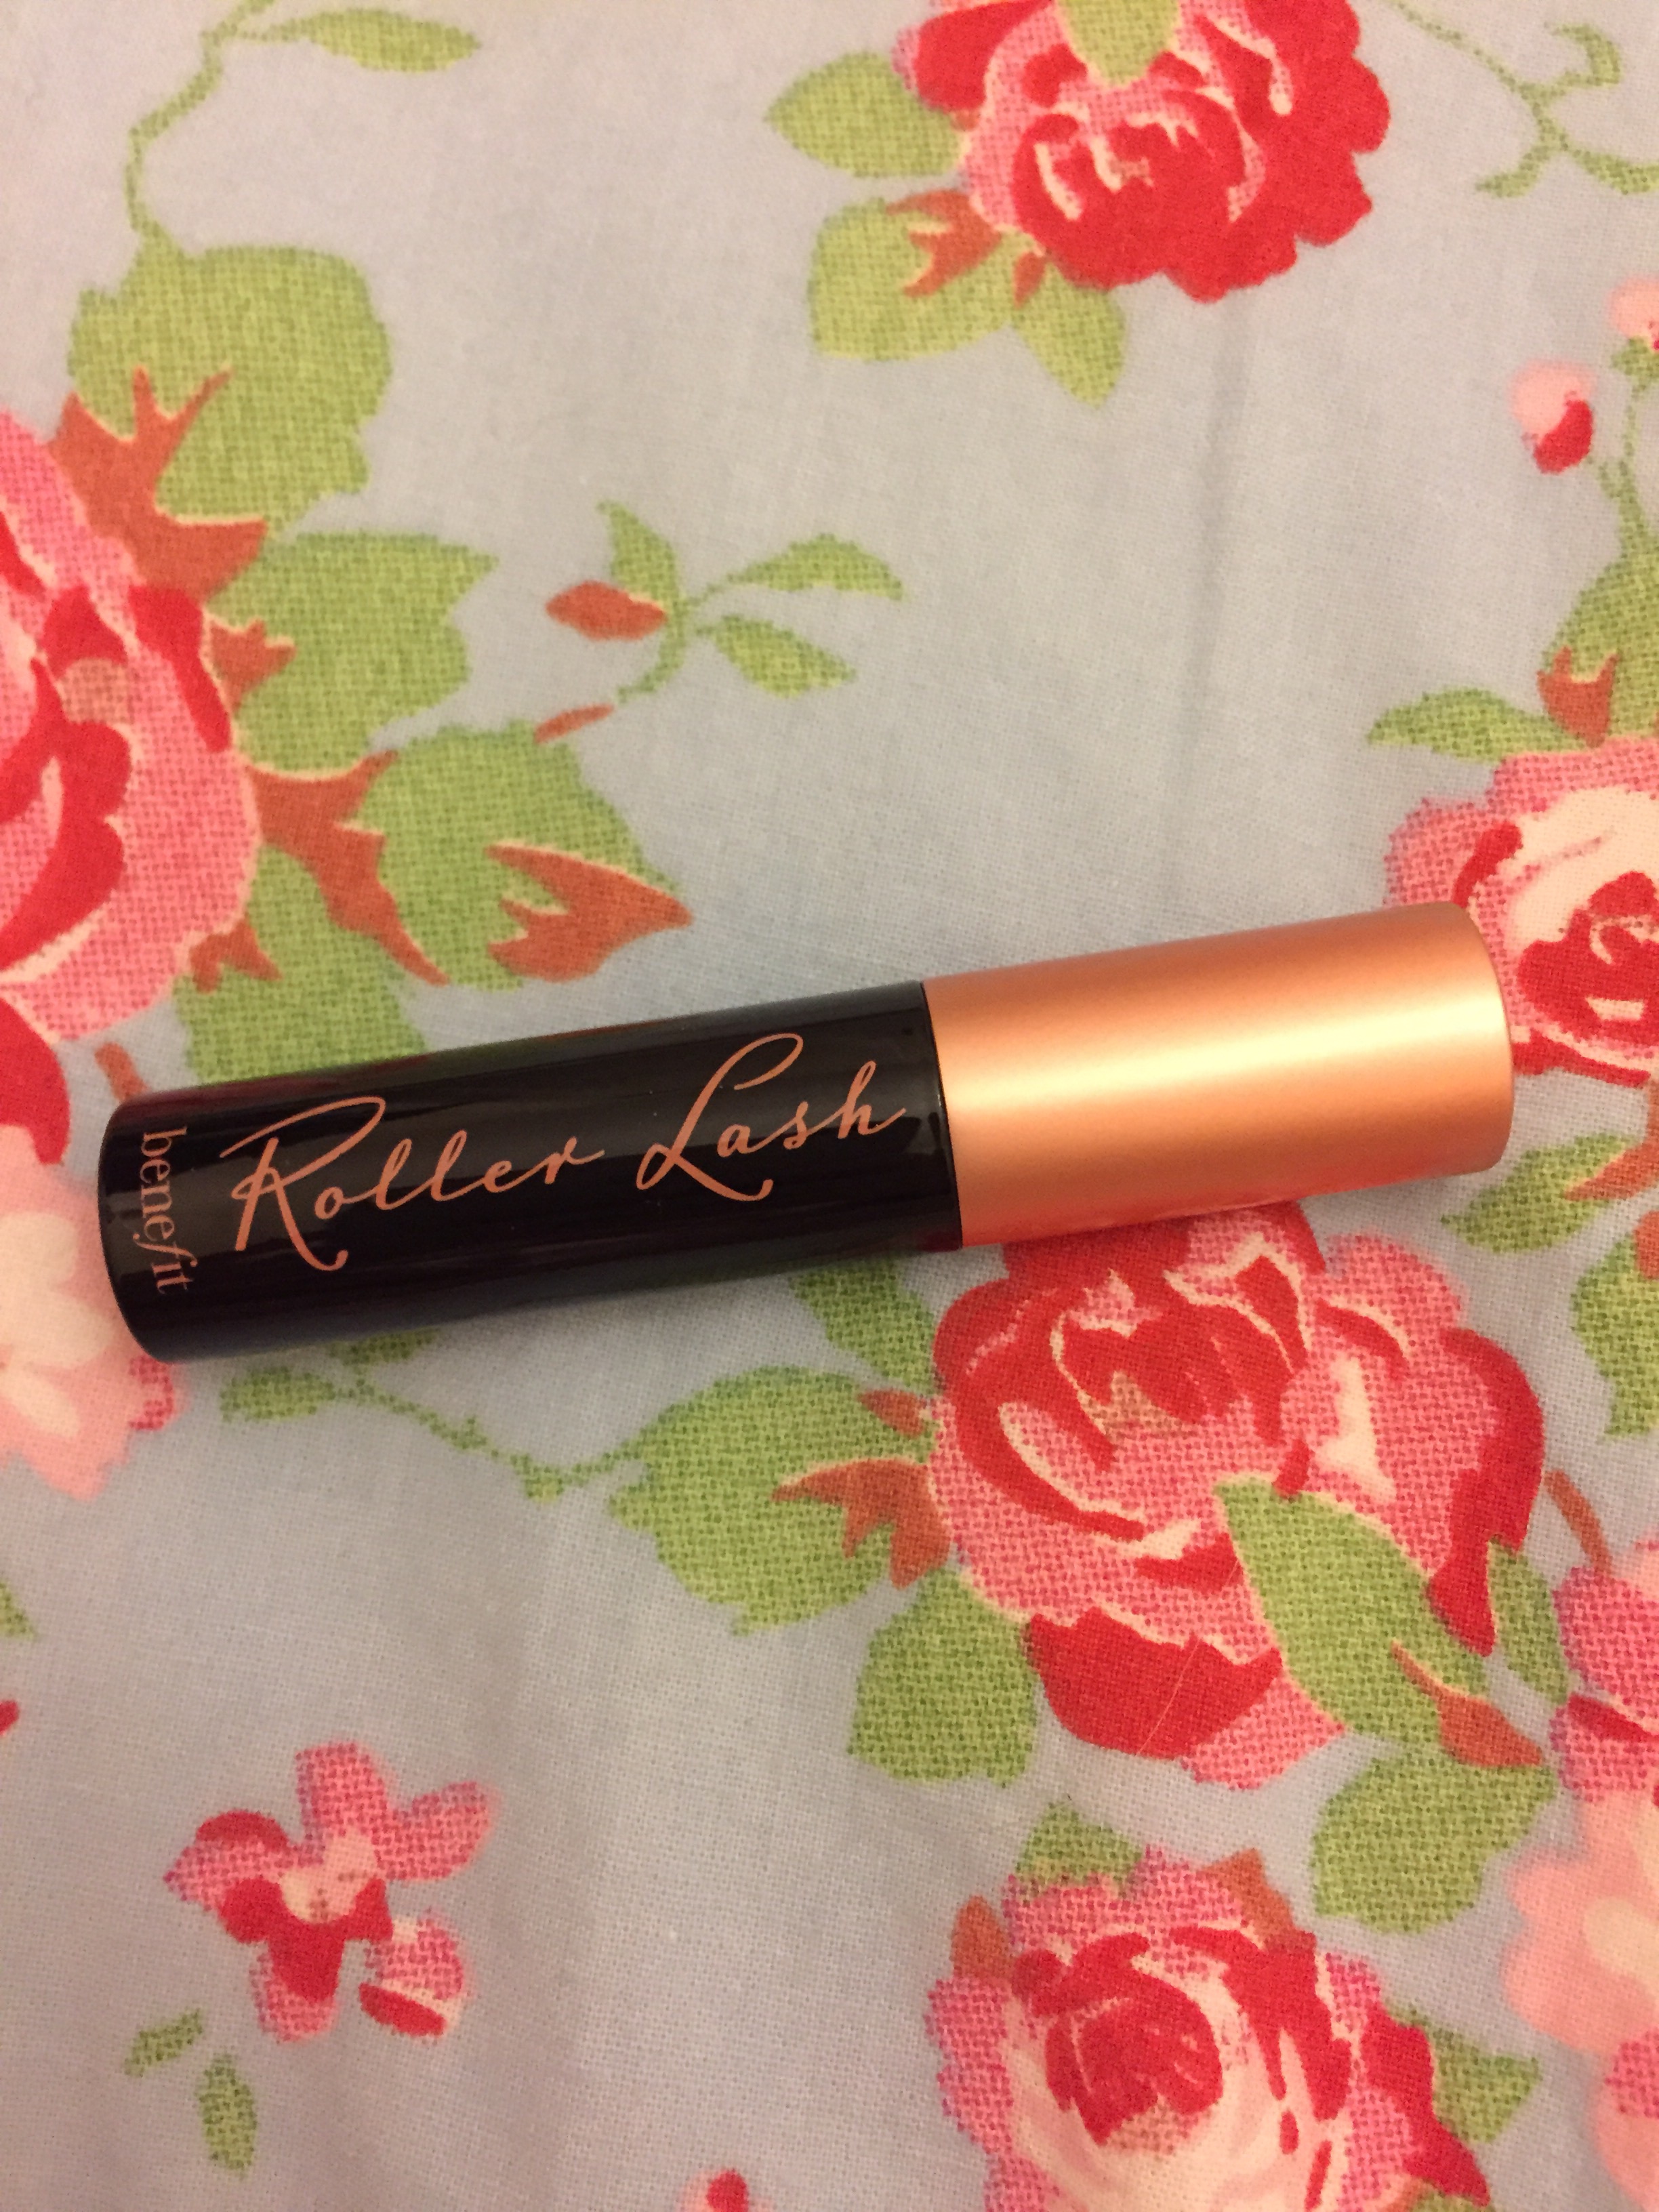 New Benefit Roller Lash Mascara Review! (Before and After pics!!) | Beauty  by Gigi